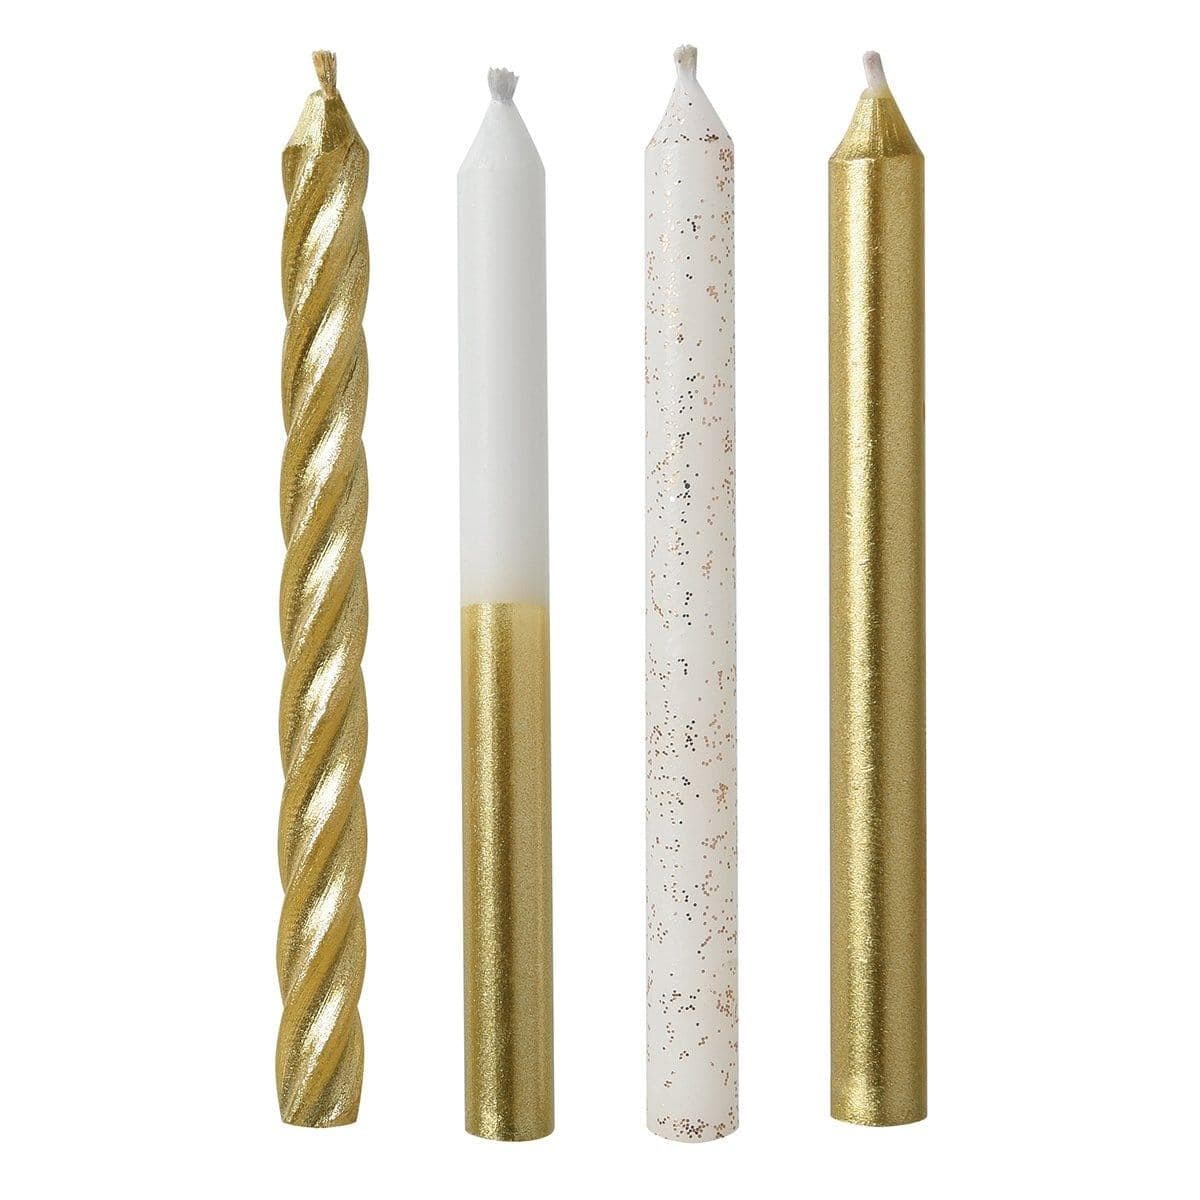 Buy Cake Supplies Gold Metallic Candles with Glitter, 12 Counts sold at Party Expert